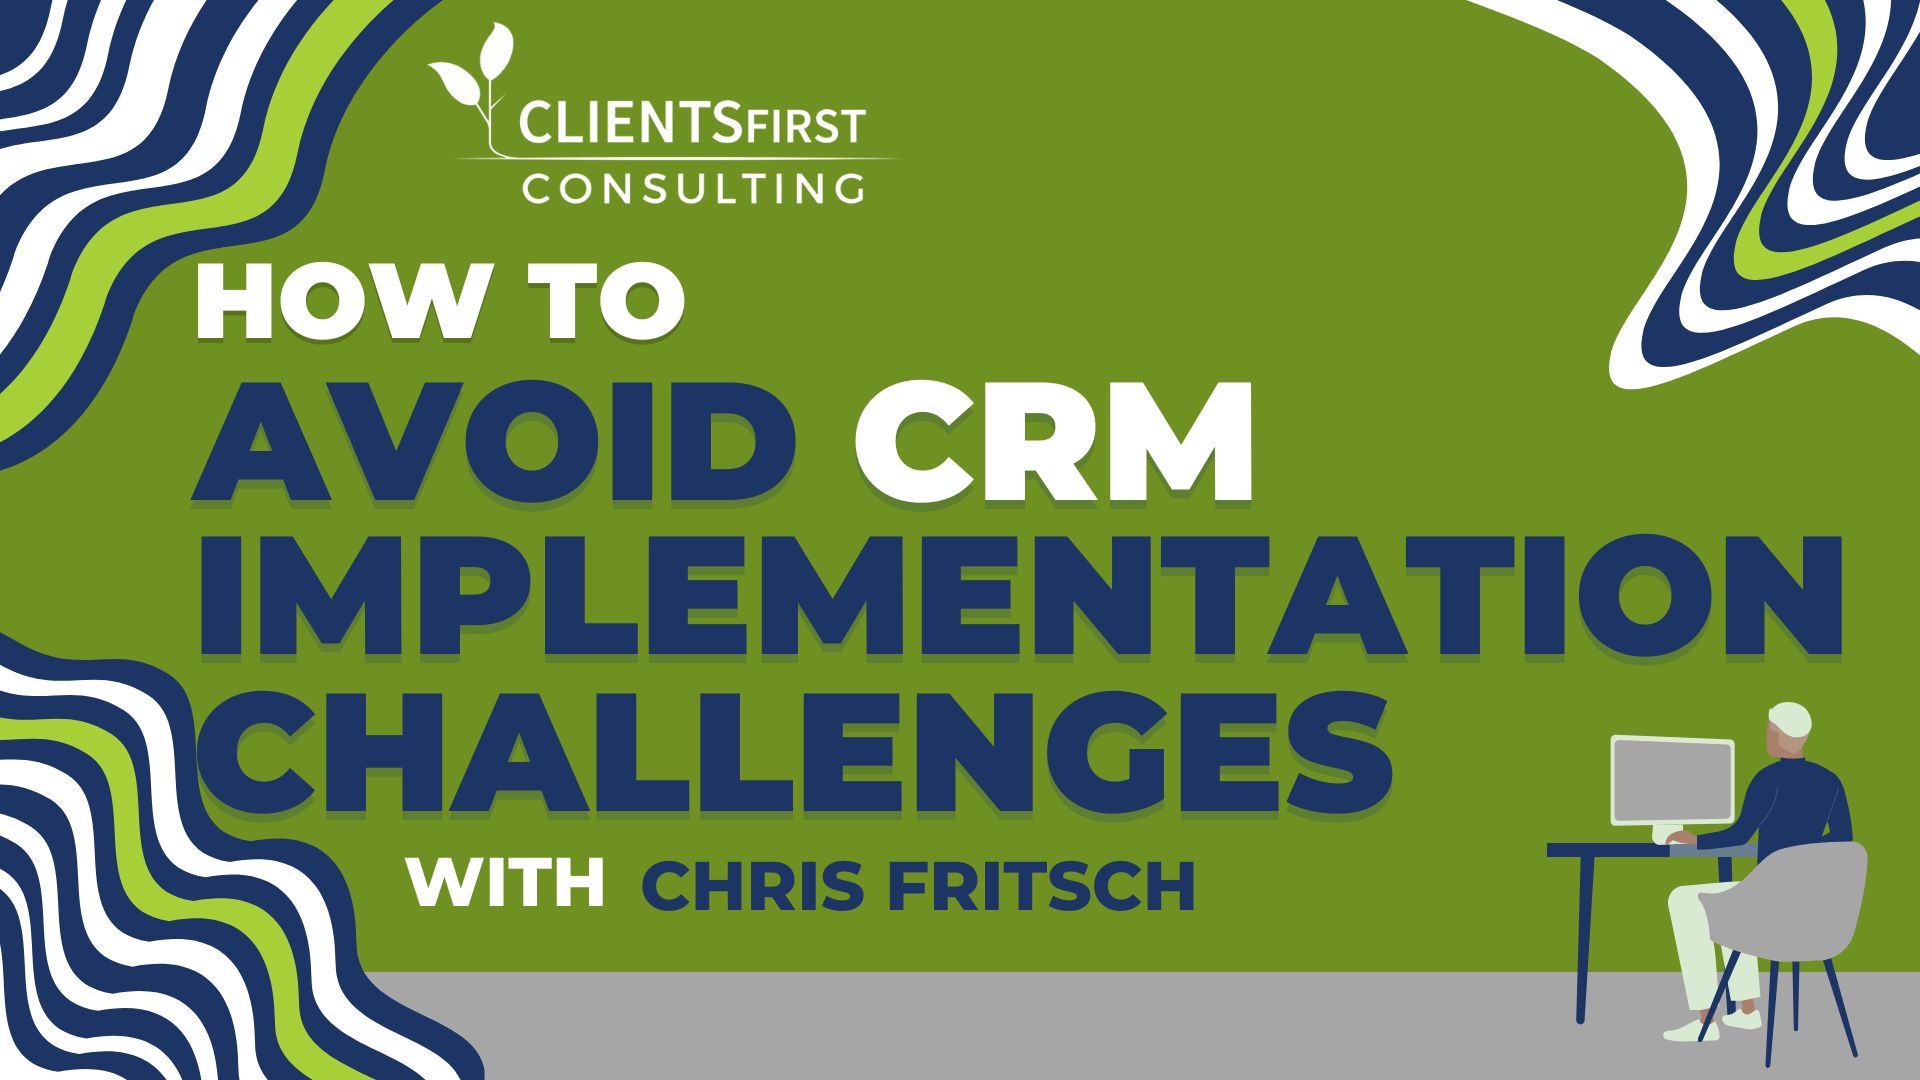 How To Avoid CRM Implementation Challenges